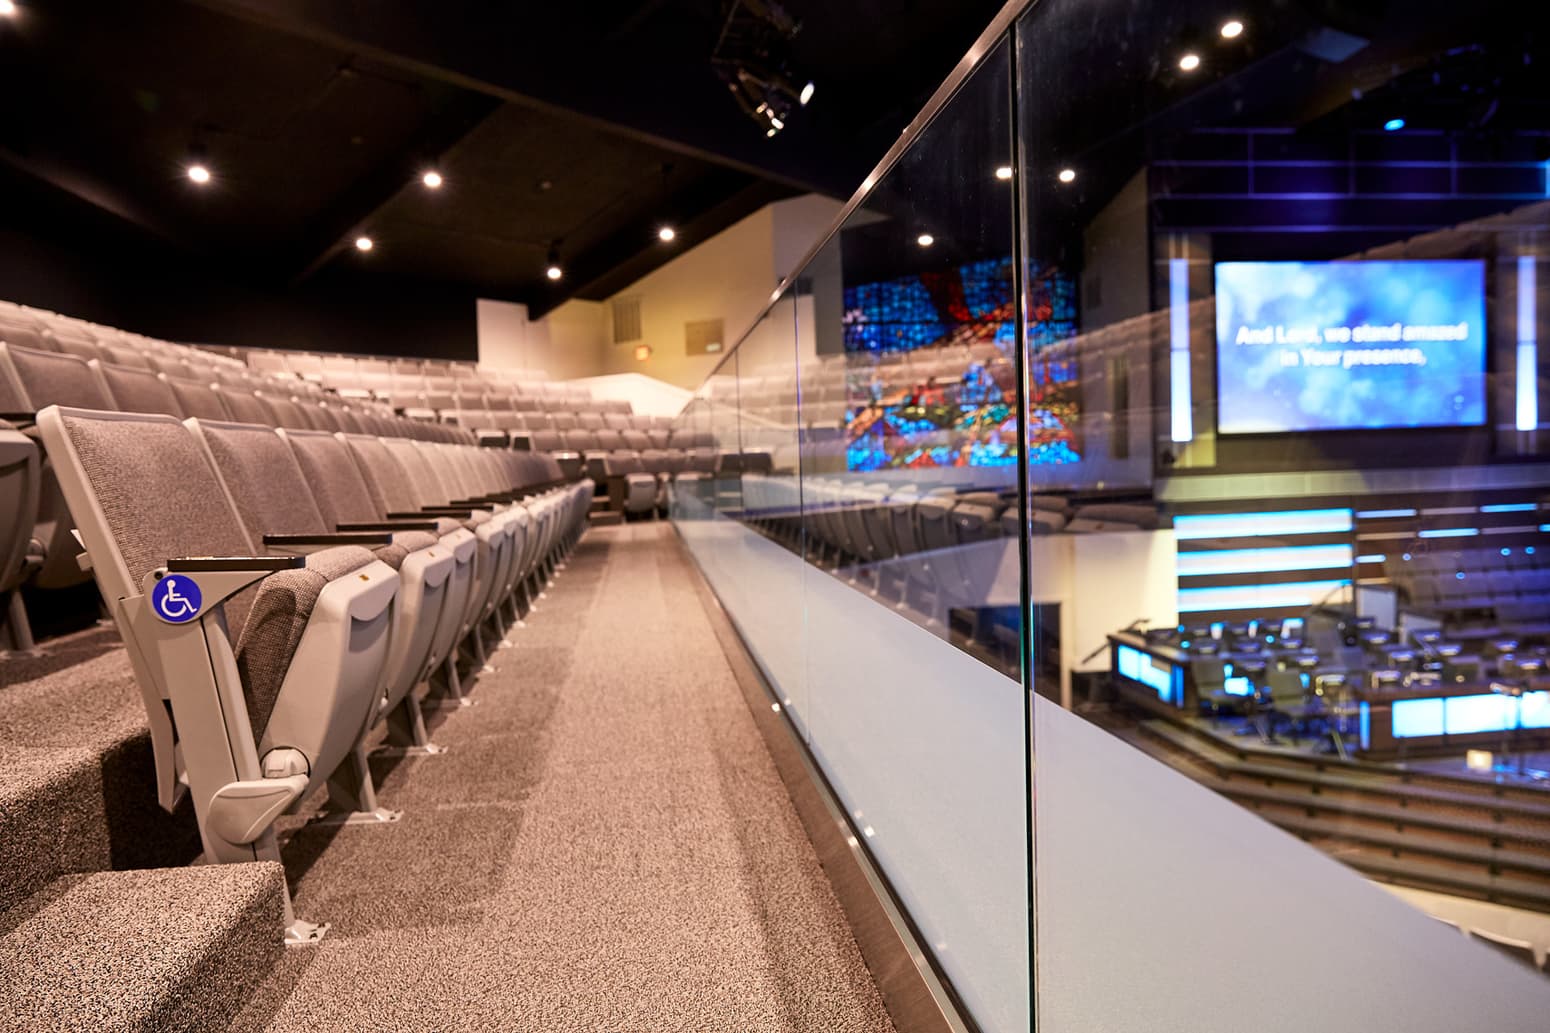 Church interior design and auditorium design expertise merge beautifully in this project.